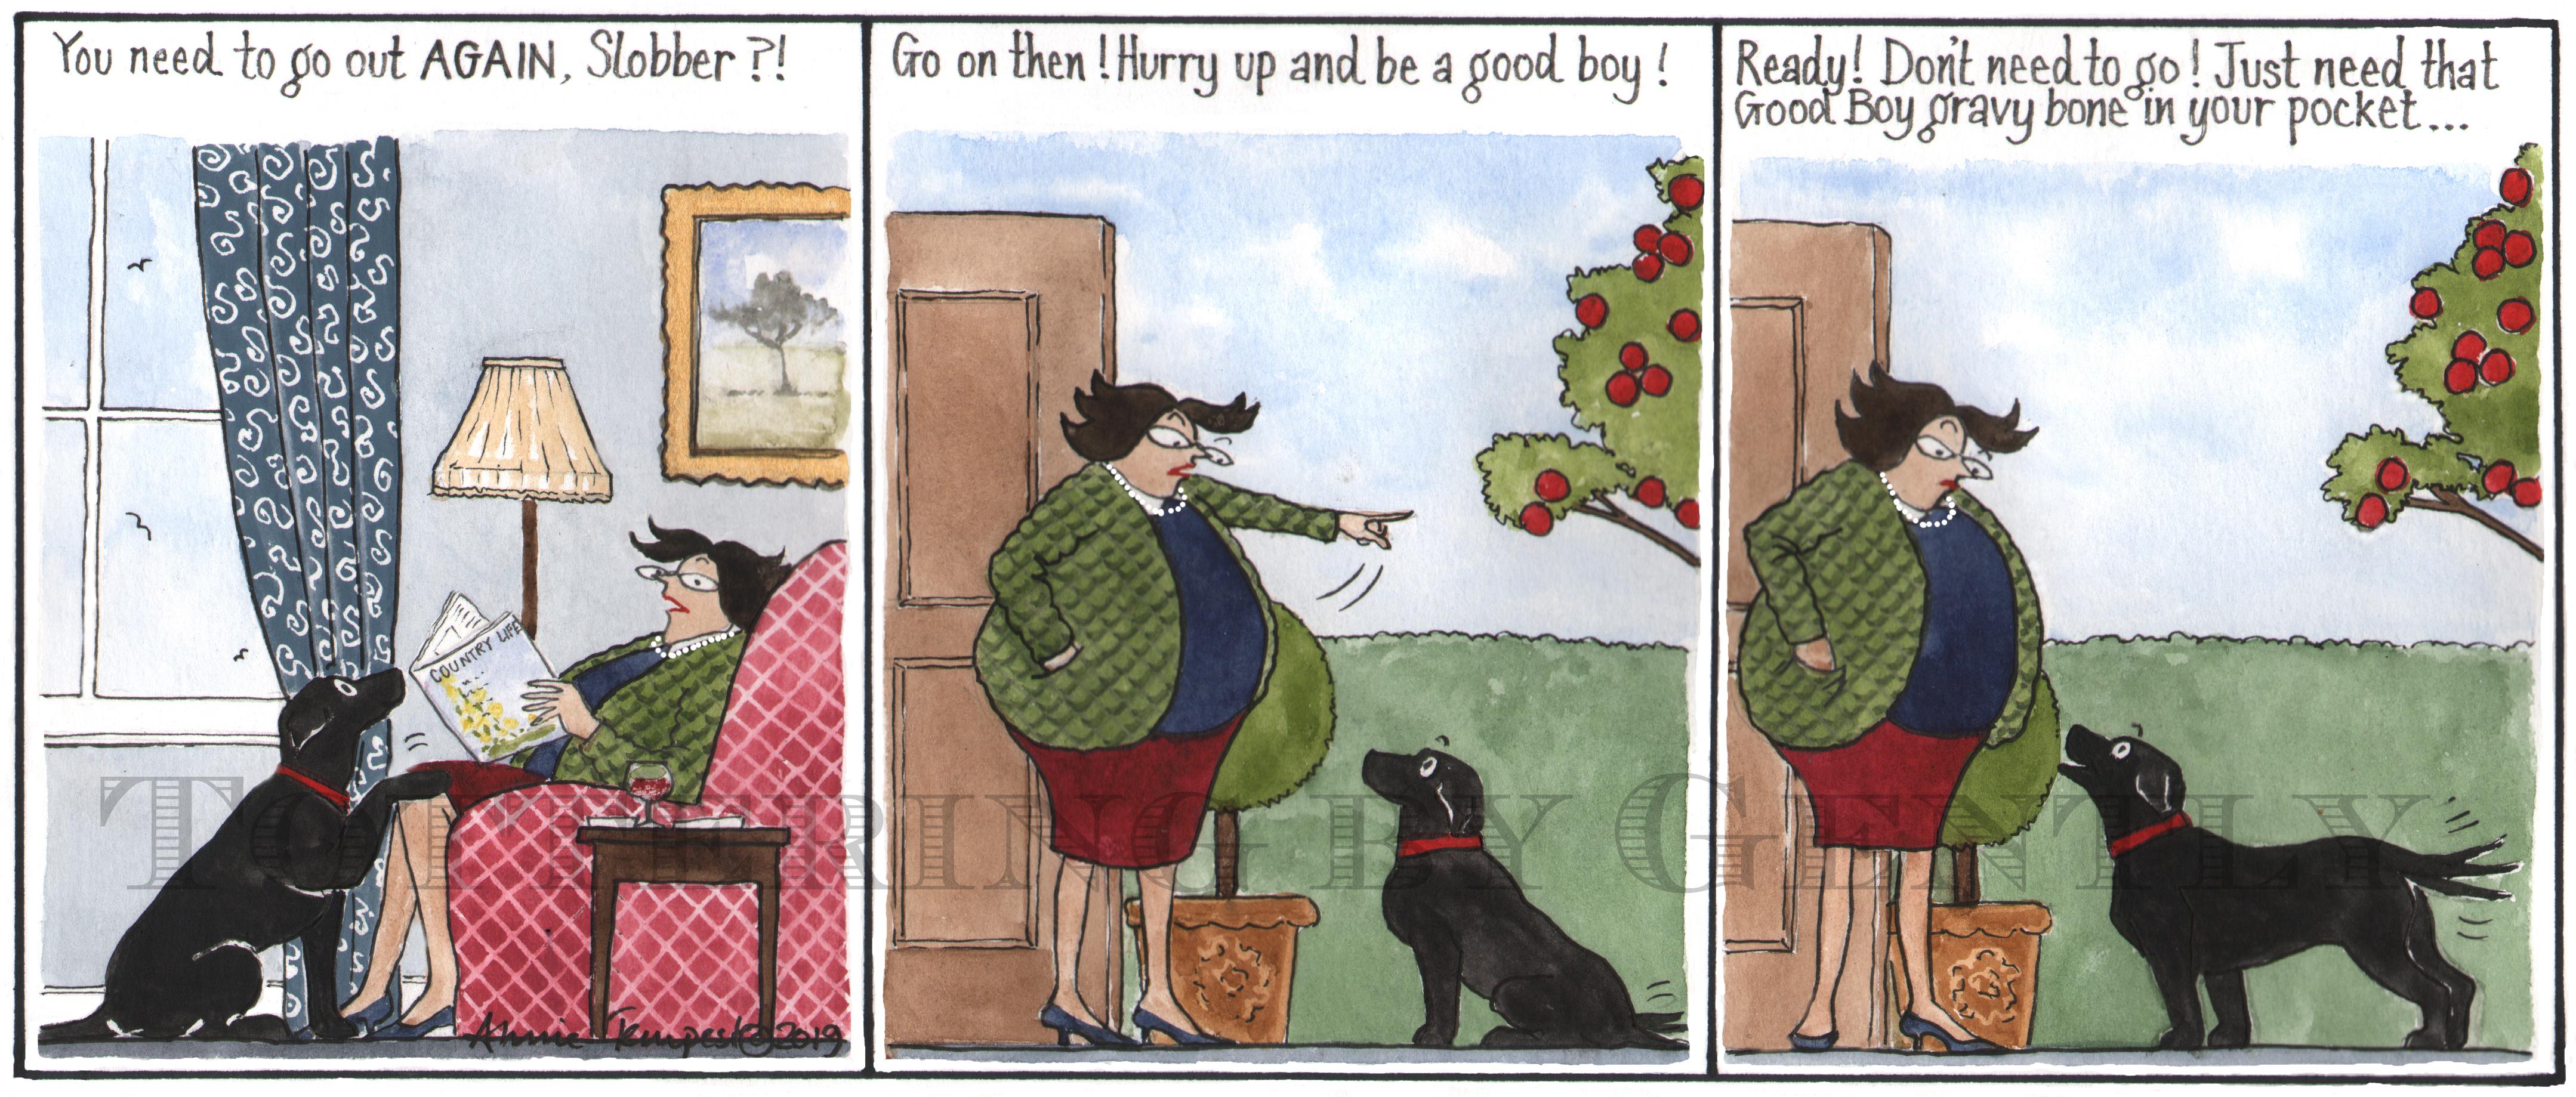 Dog needs to go out again. A humorous framed dog print by the well known cartoonist Annie Tempest. The resident dog, Slobber the Labrador looks at his owner, Daffy imploringly to be let out. Daffy lets the labrador out while he is thinking all he